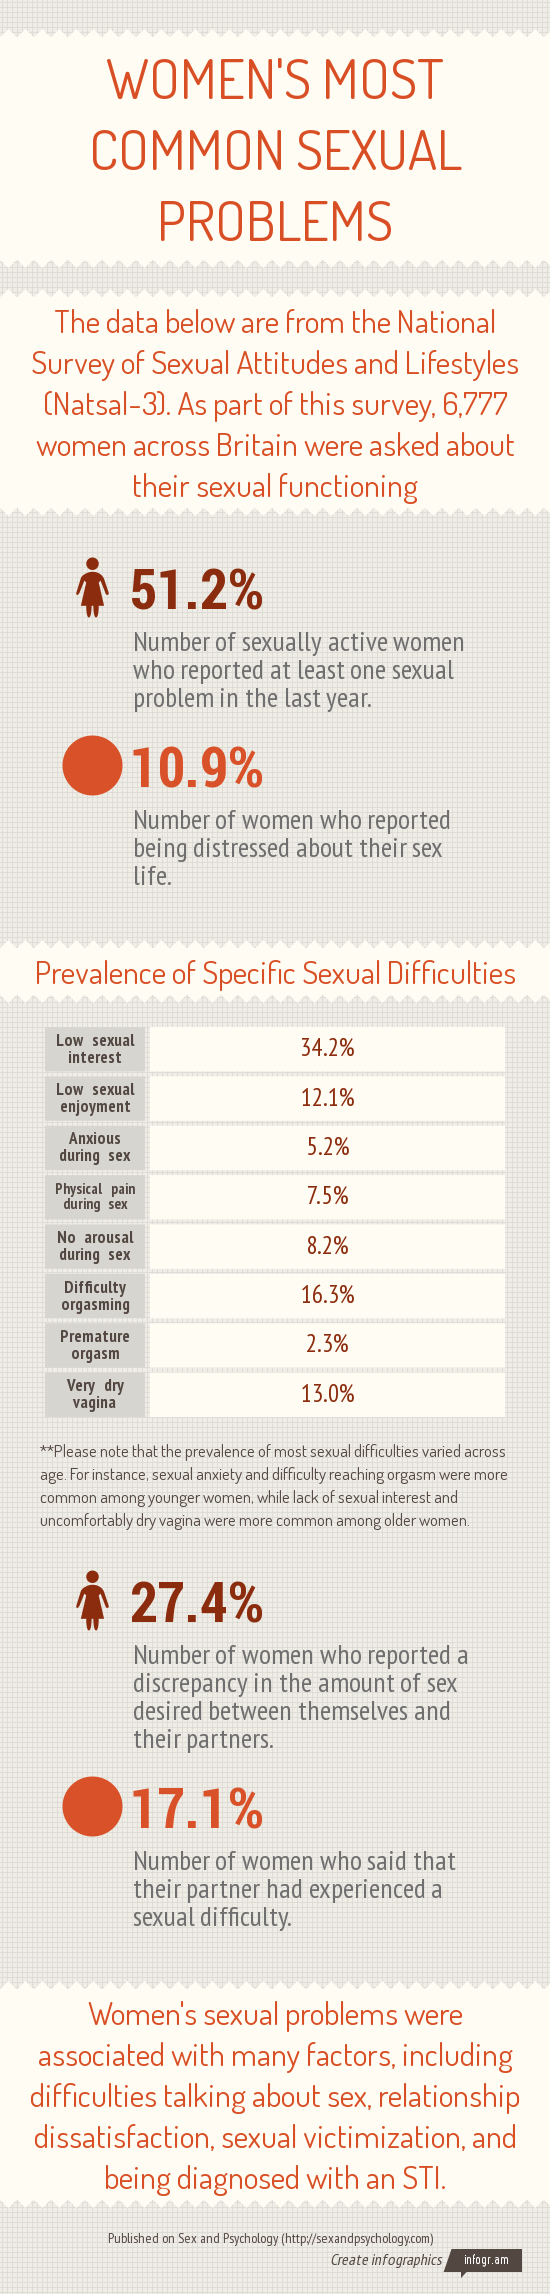 Infographic detailing women's most common sexual problems according to the NATSAL-3